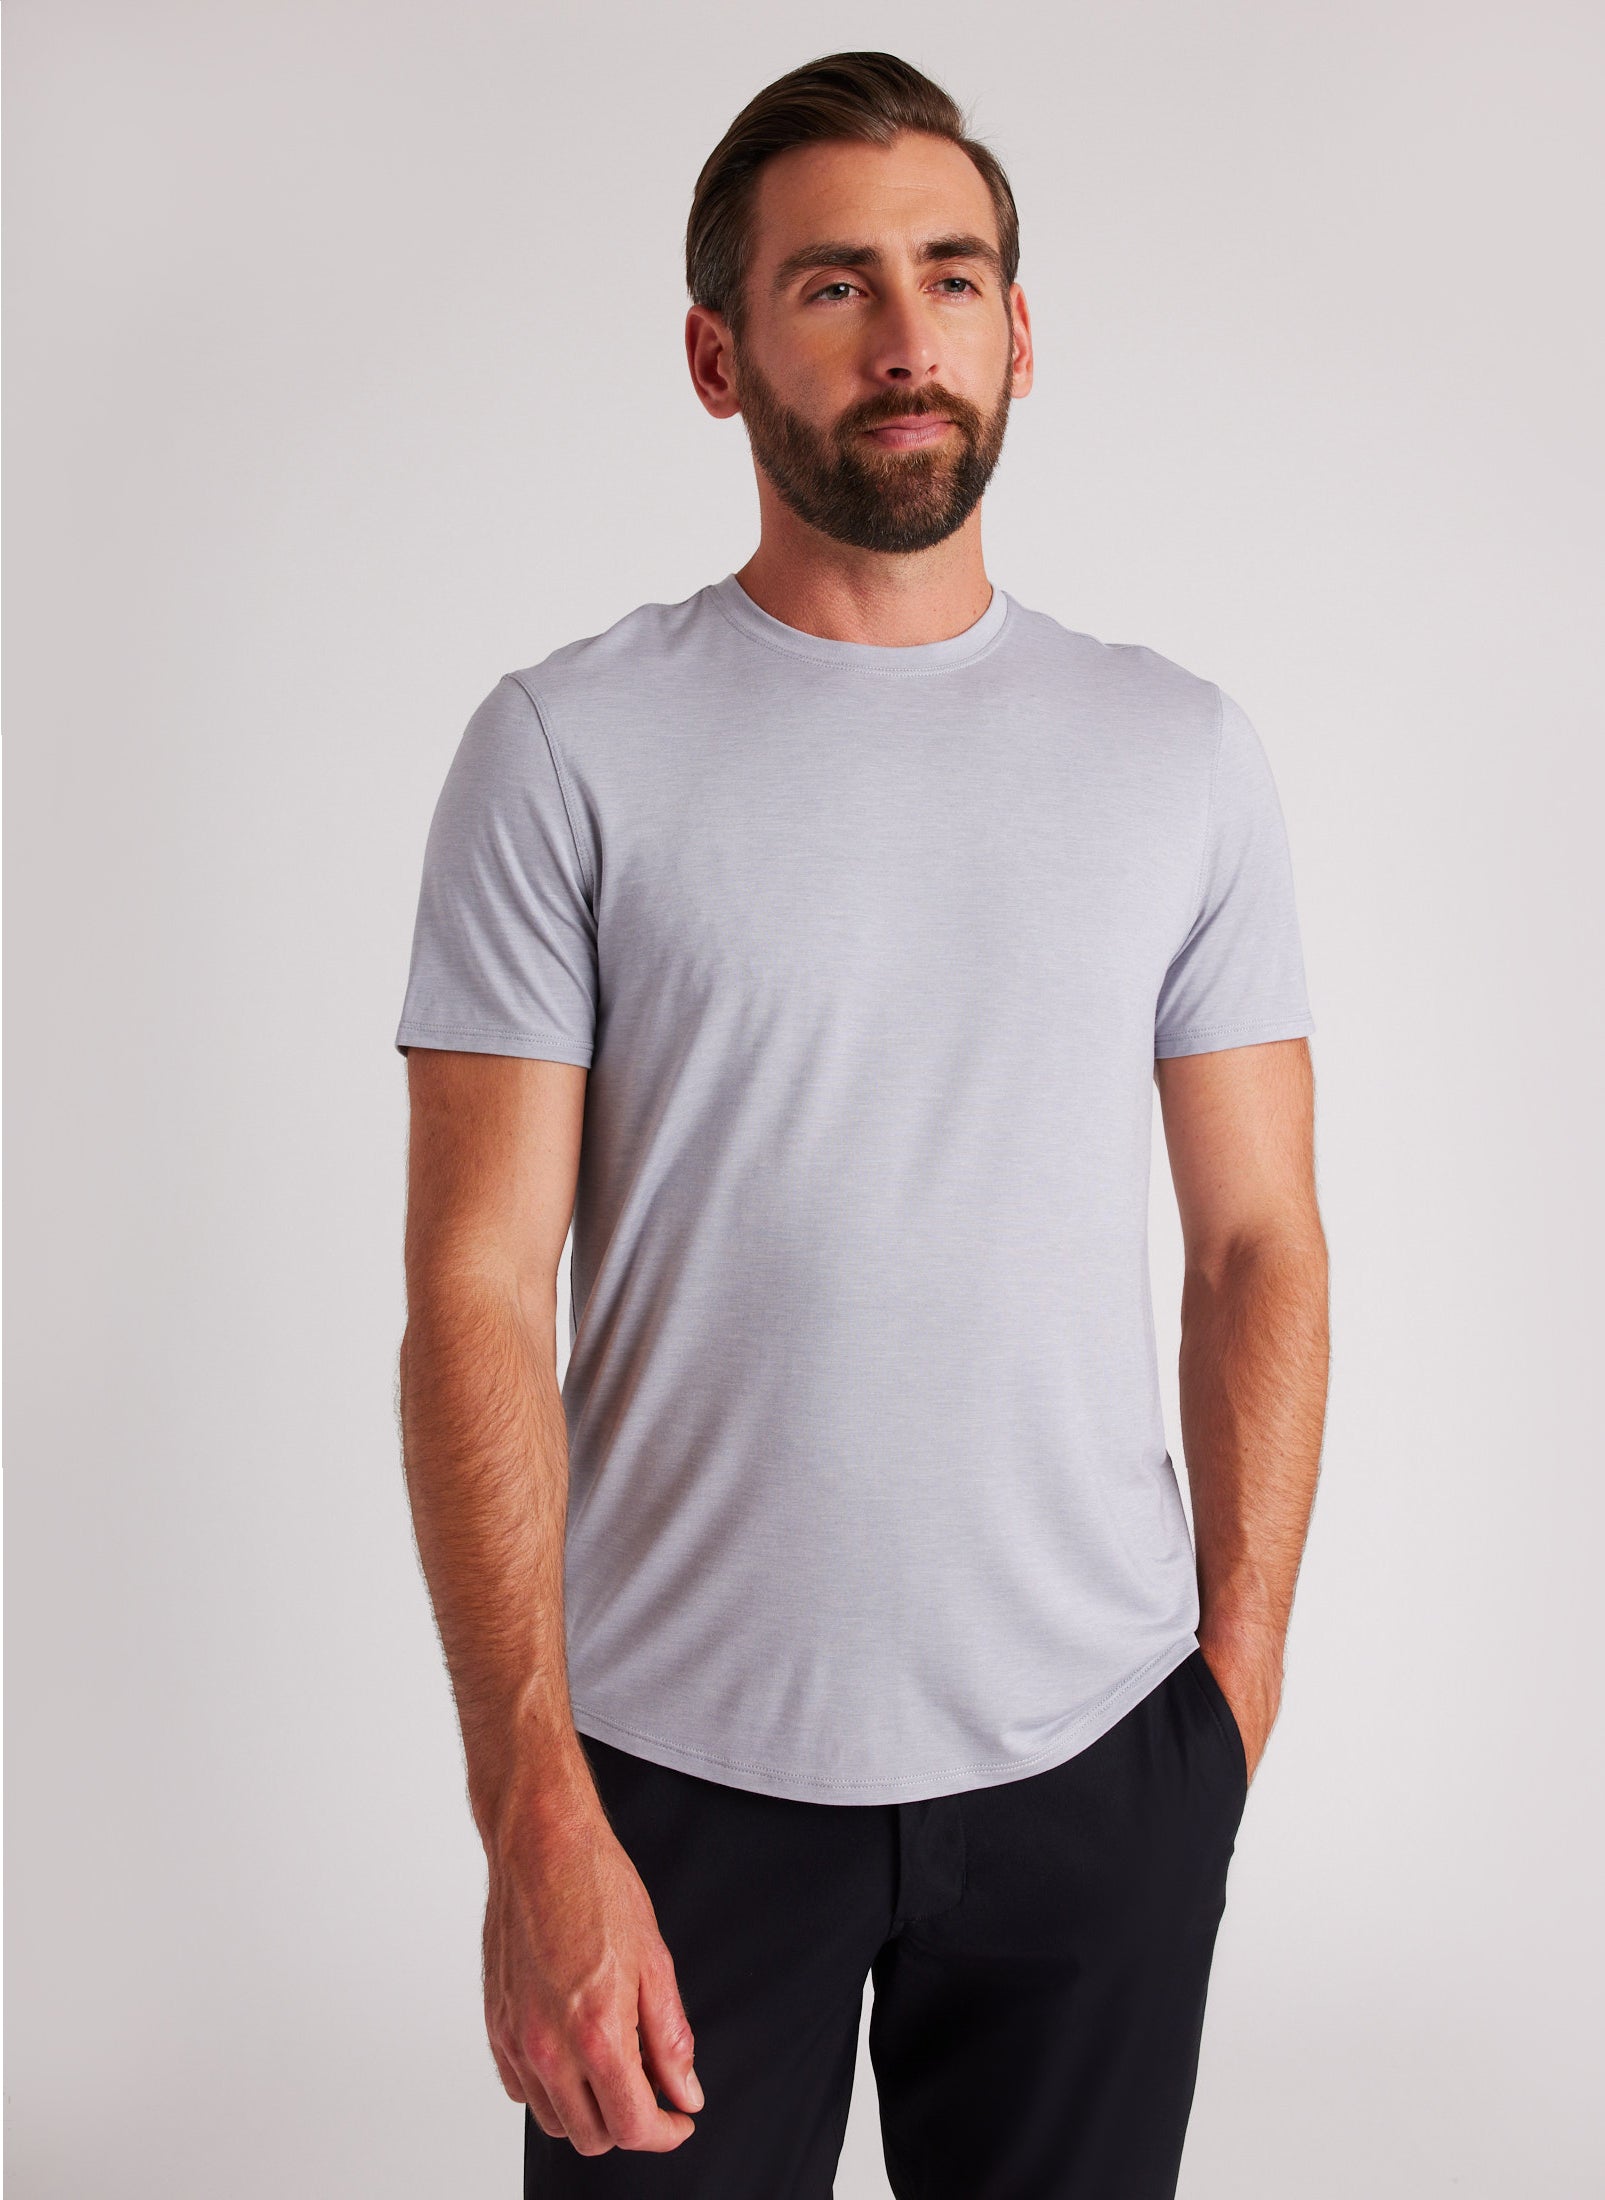 Ace Crewneck Tees 3 Pack | Men's Tees – Kit and Ace